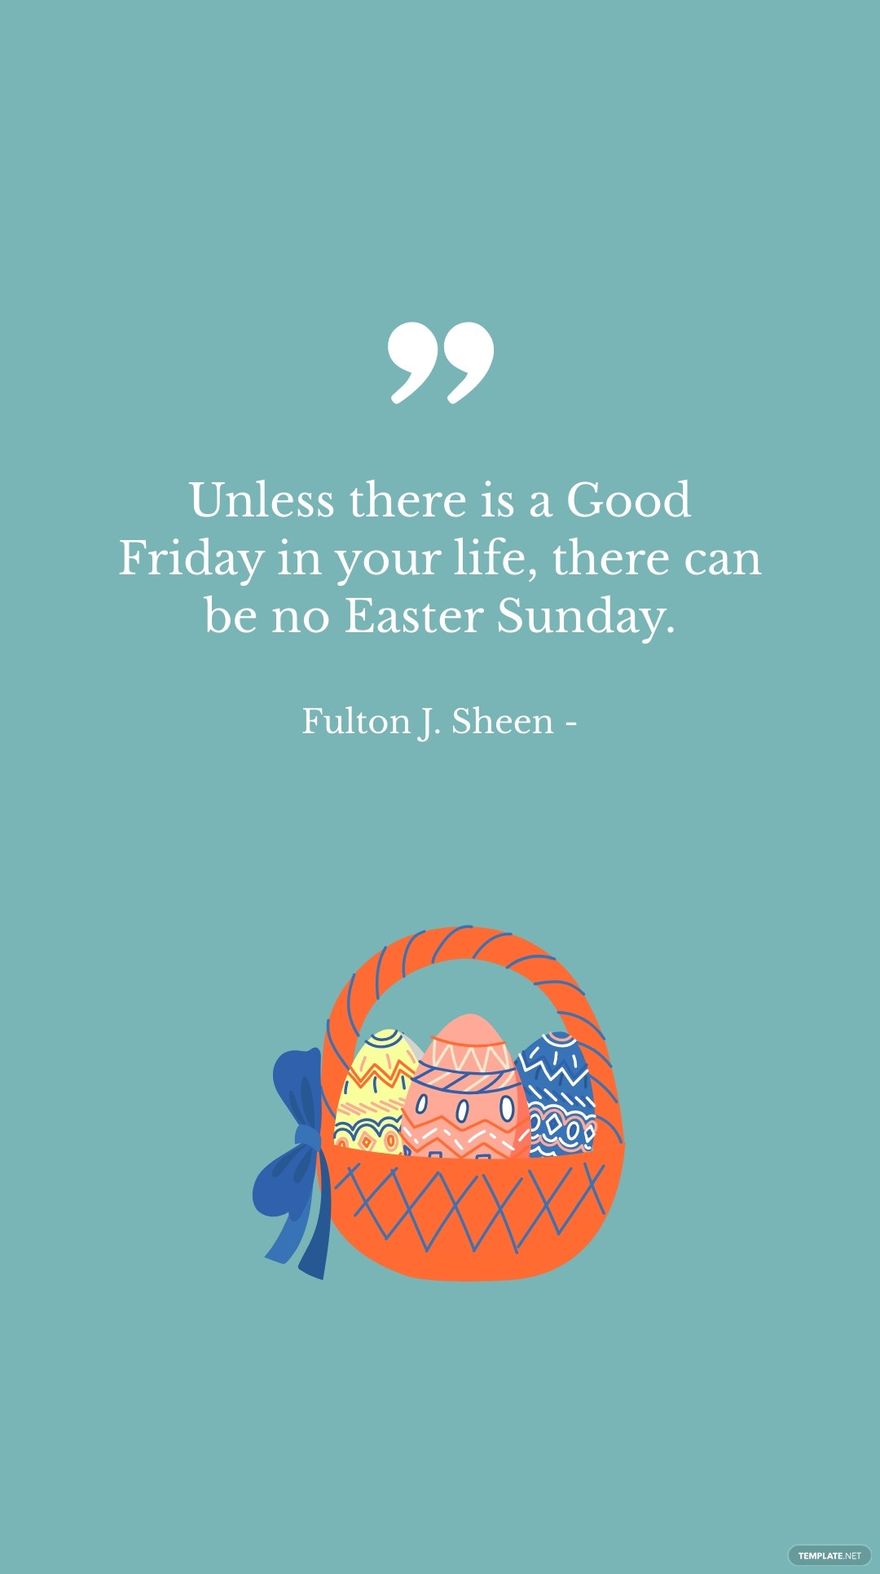 Fulton J. Sheen - Unless there is a Good Friday in your life, there can be no Easter Sunday. in JPG